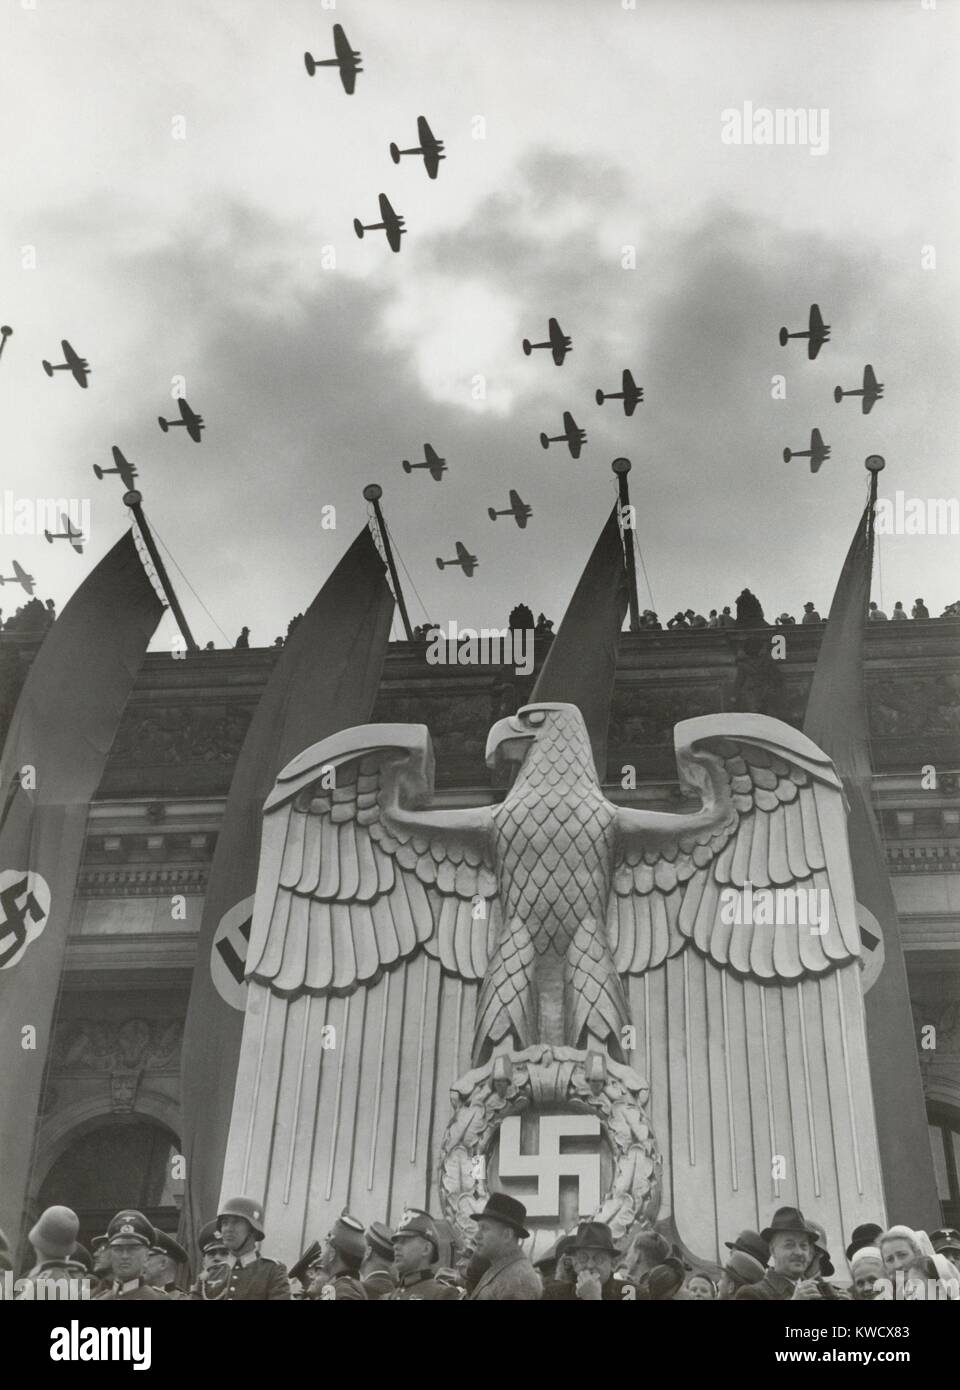 Luftwaffe Fly-By in honor of Hitlers birthday in Charlottenburg, Berlin, April 20, 1939. On the building is a sculpture of a Nazi German eagle and banners with swastikas (BSLOC 2017 2 70) Stock Photo